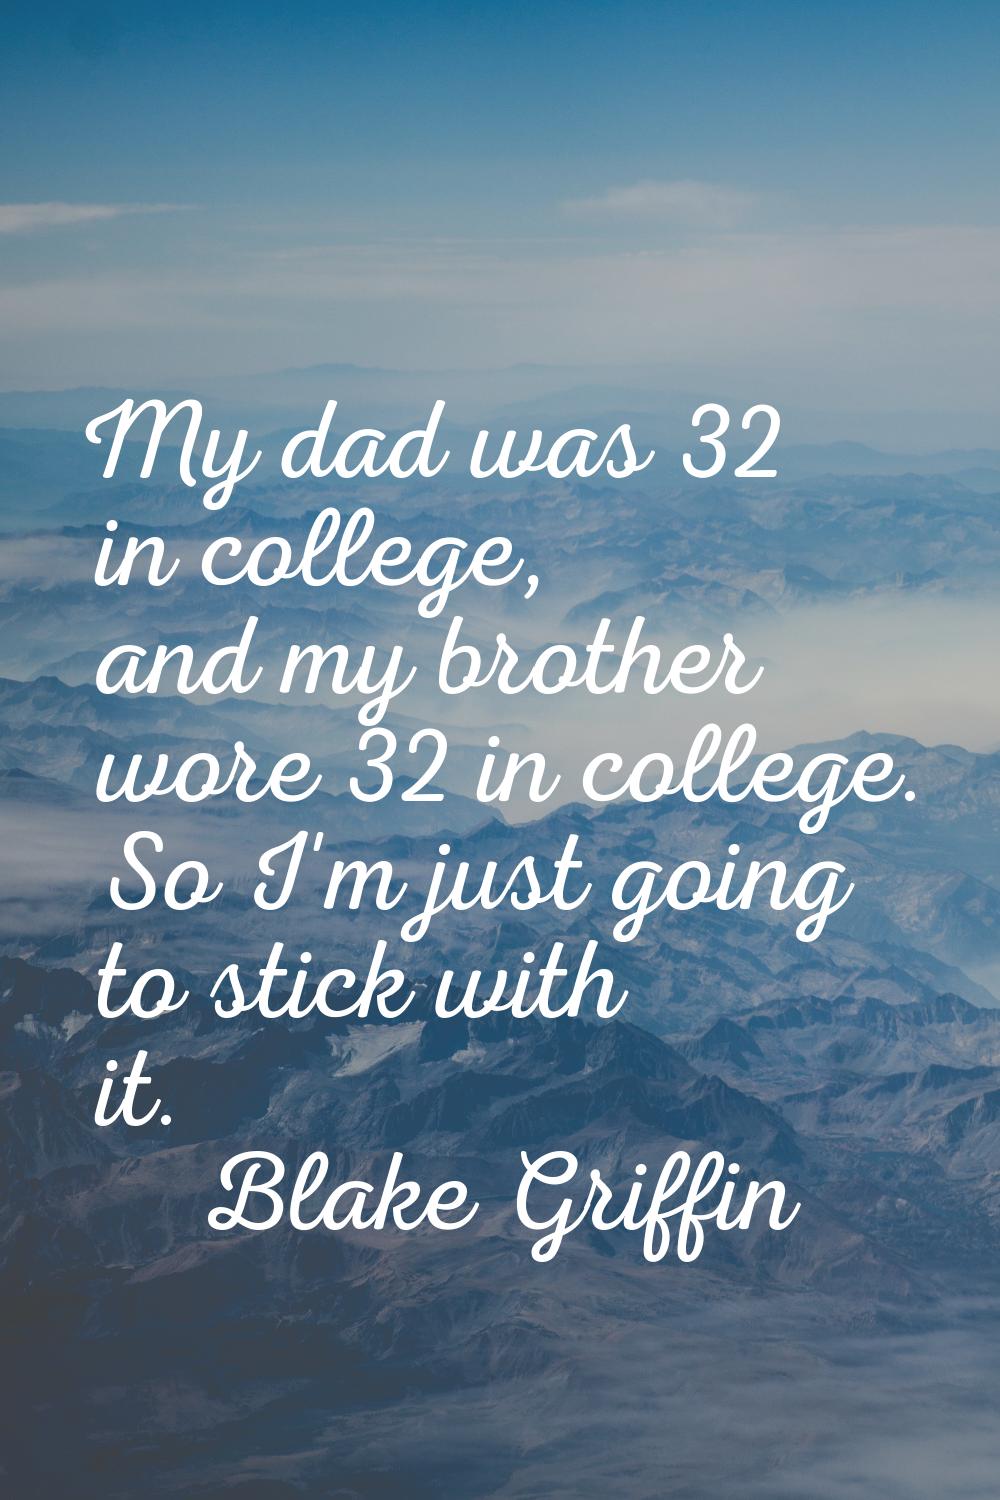 My dad was 32 in college, and my brother wore 32 in college. So I'm just going to stick with it.